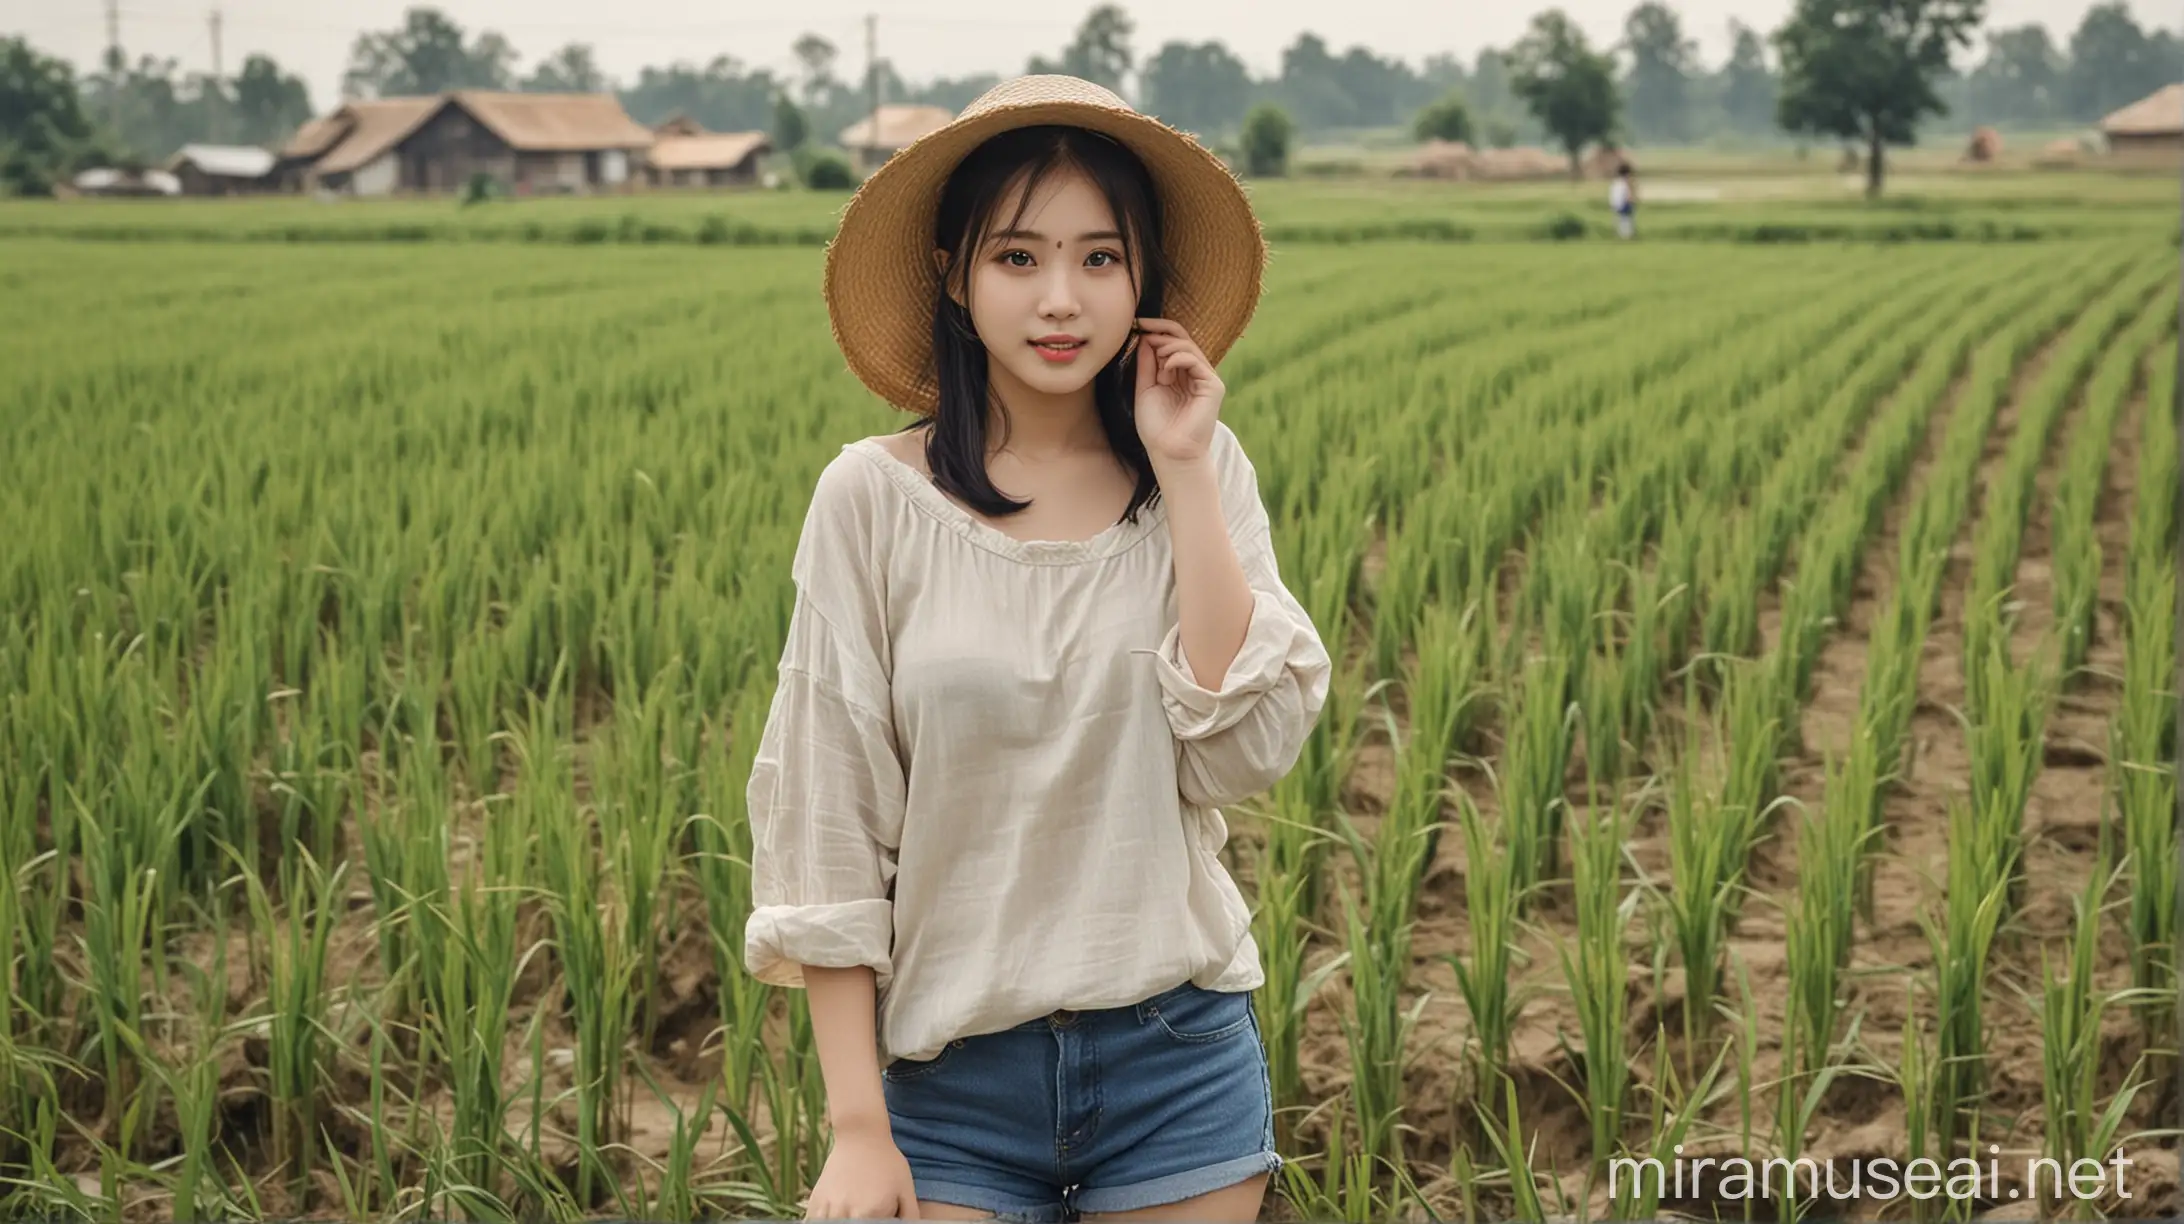 Chubby Chinese Girl in Countryside Rice Fields